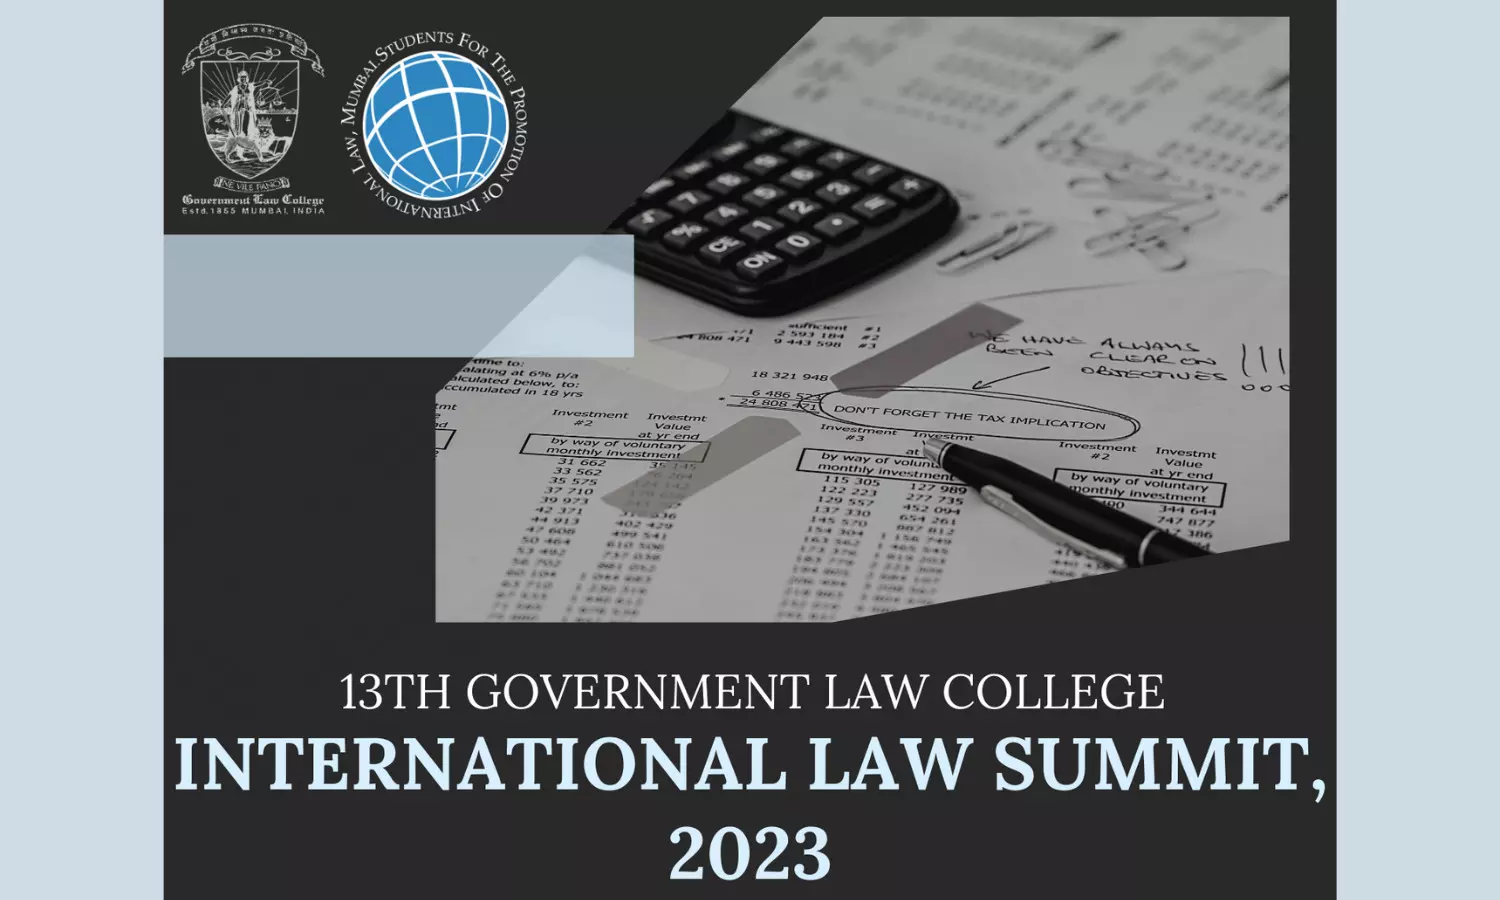 13th SPIL International Law Summit, 2023 | SPIL, Government Law College, Mumbai | 31 March - 2 April, 2023